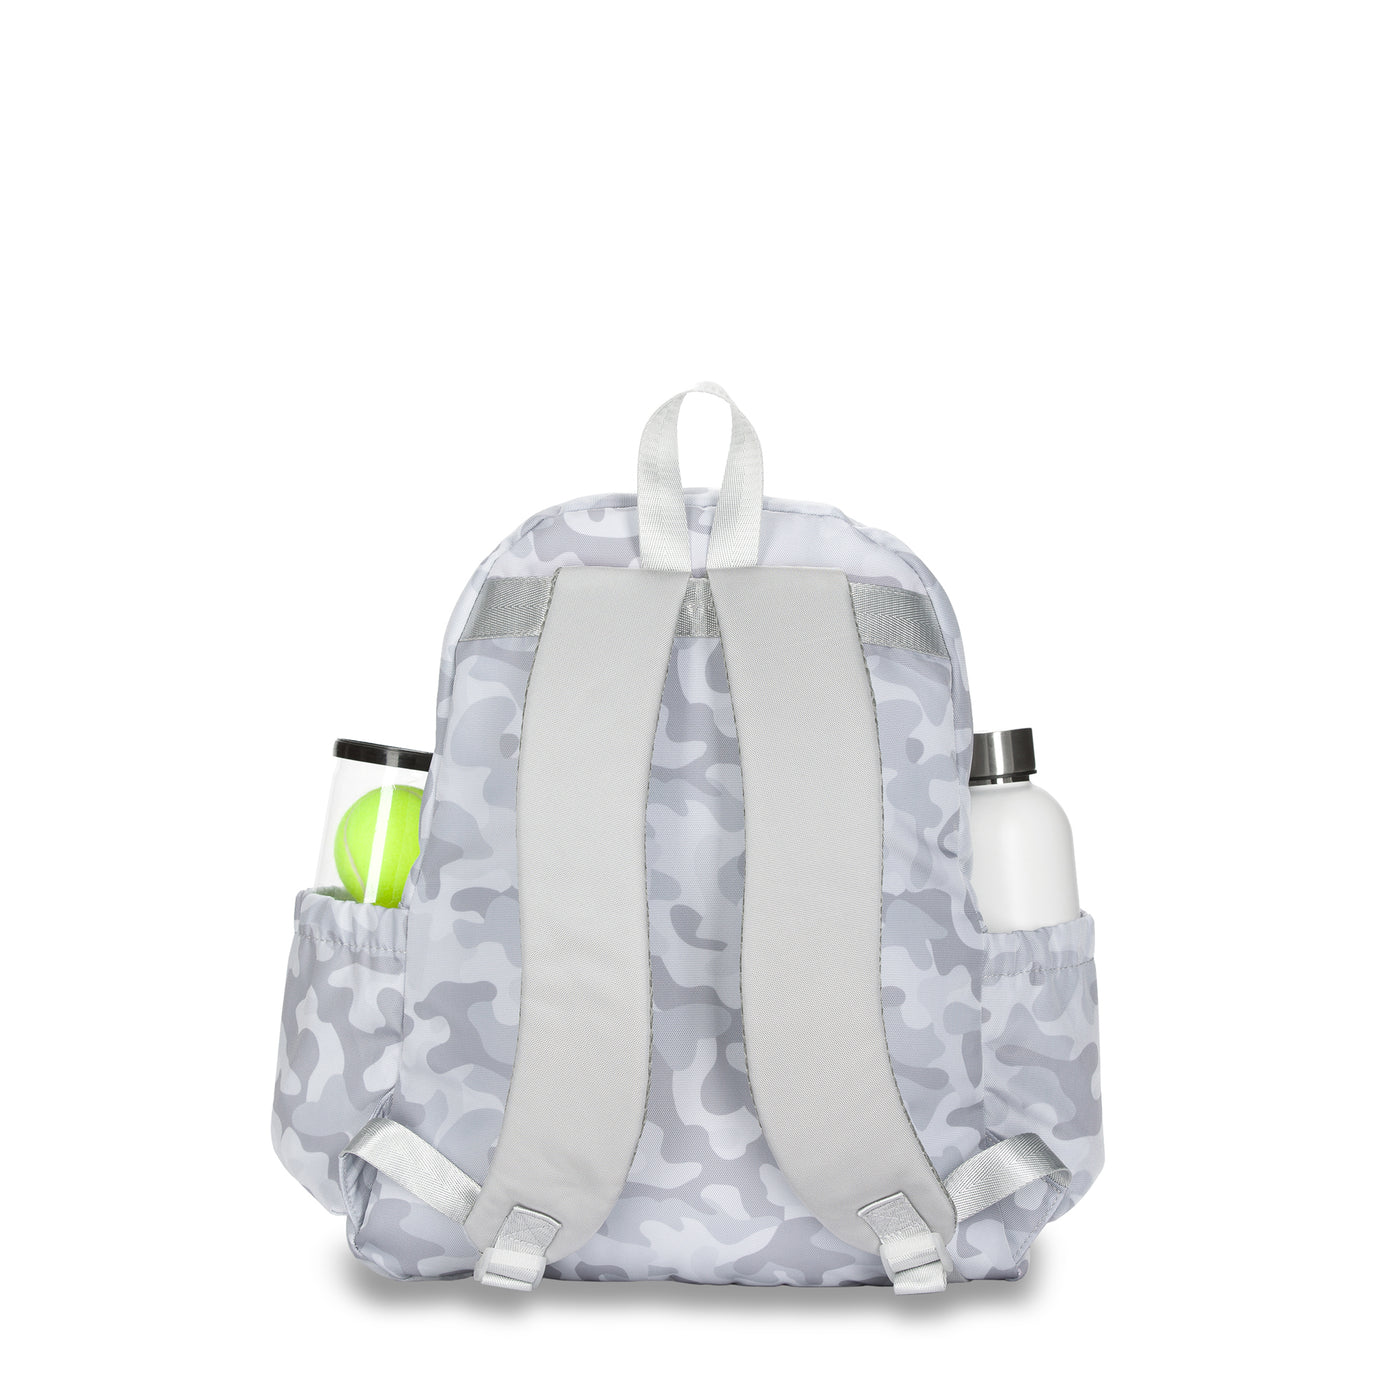 Back view of a grey camo pattern tennis backpack. Side pockets are holding a water bottle and tennis balls.